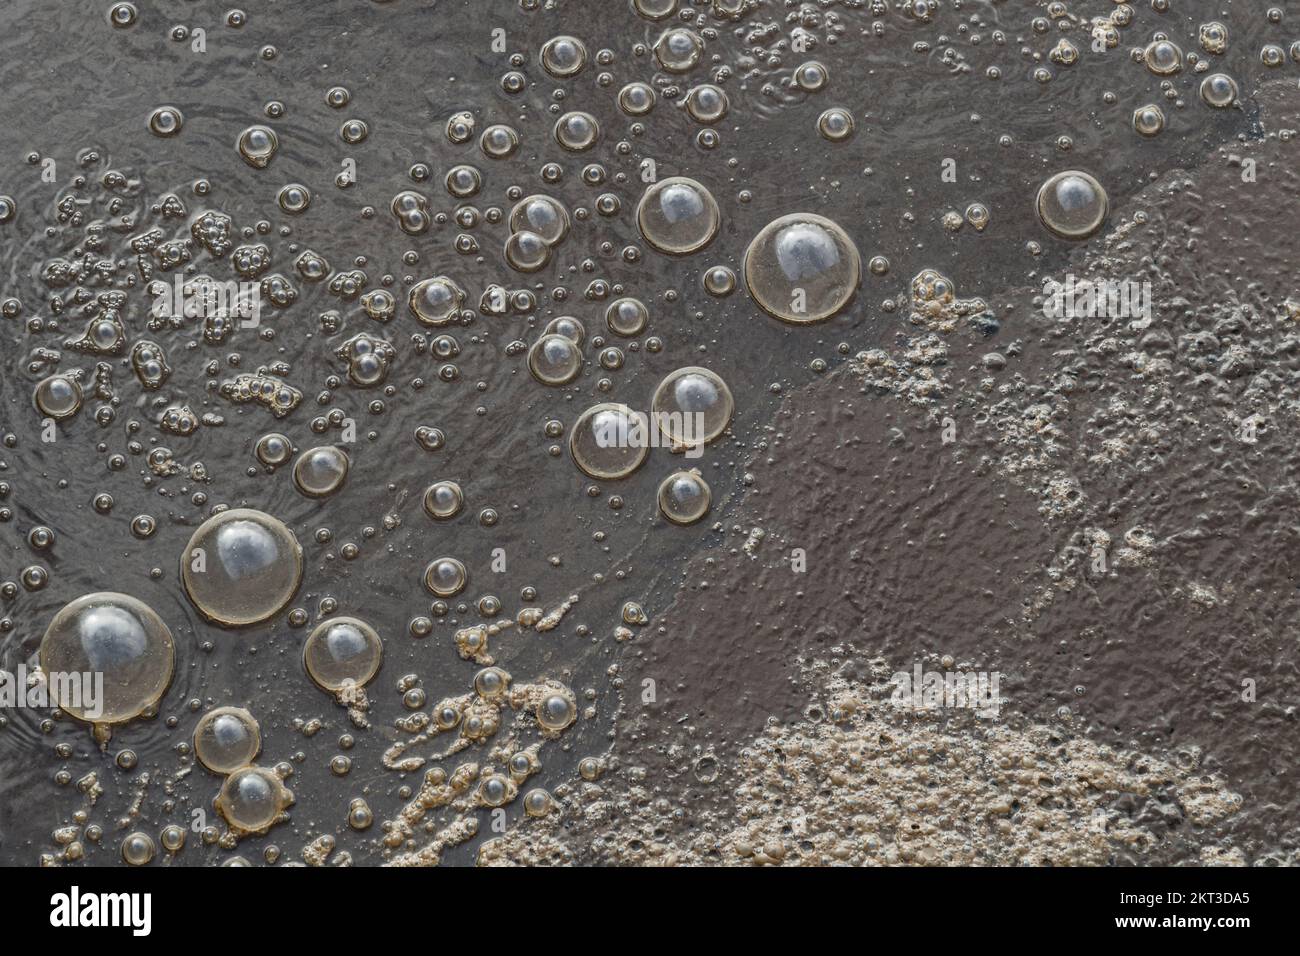 Bubbles in waste water treatment plant tanks using aeration in Aerobic Wastewater Treatment, Norristown Pennsylvania, USA Stock Photo